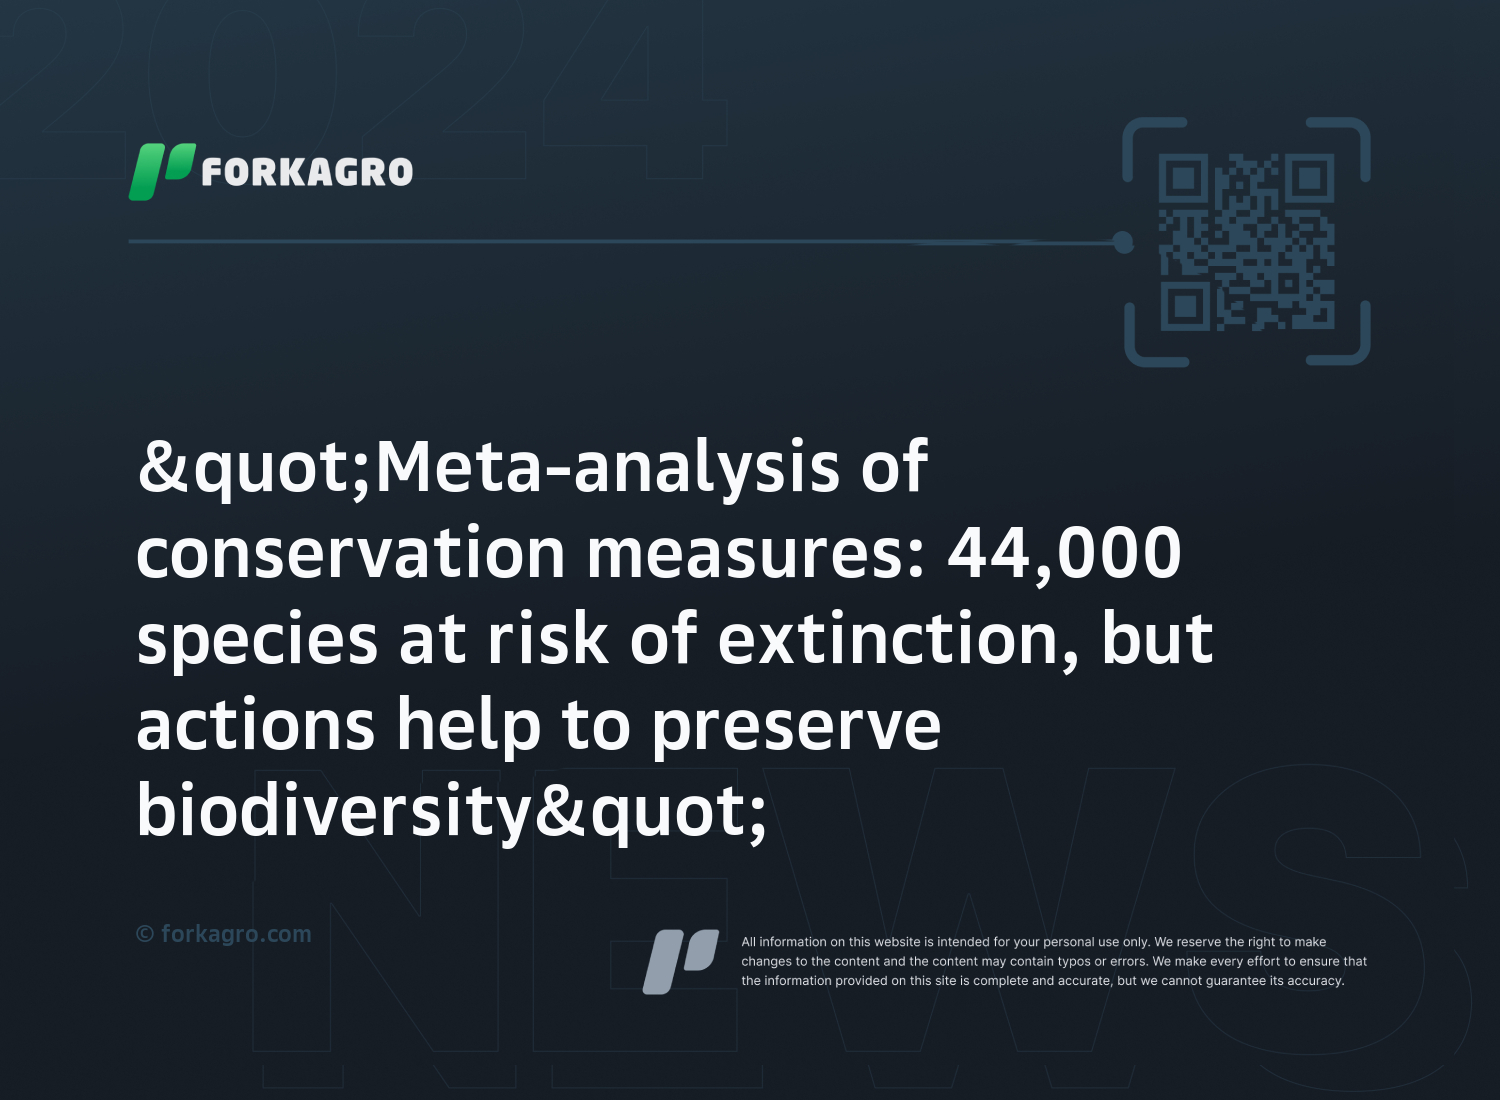 "Meta-analysis of conservation measures: 44,000 species at risk of extinction, but actions help to preserve biodiversity"